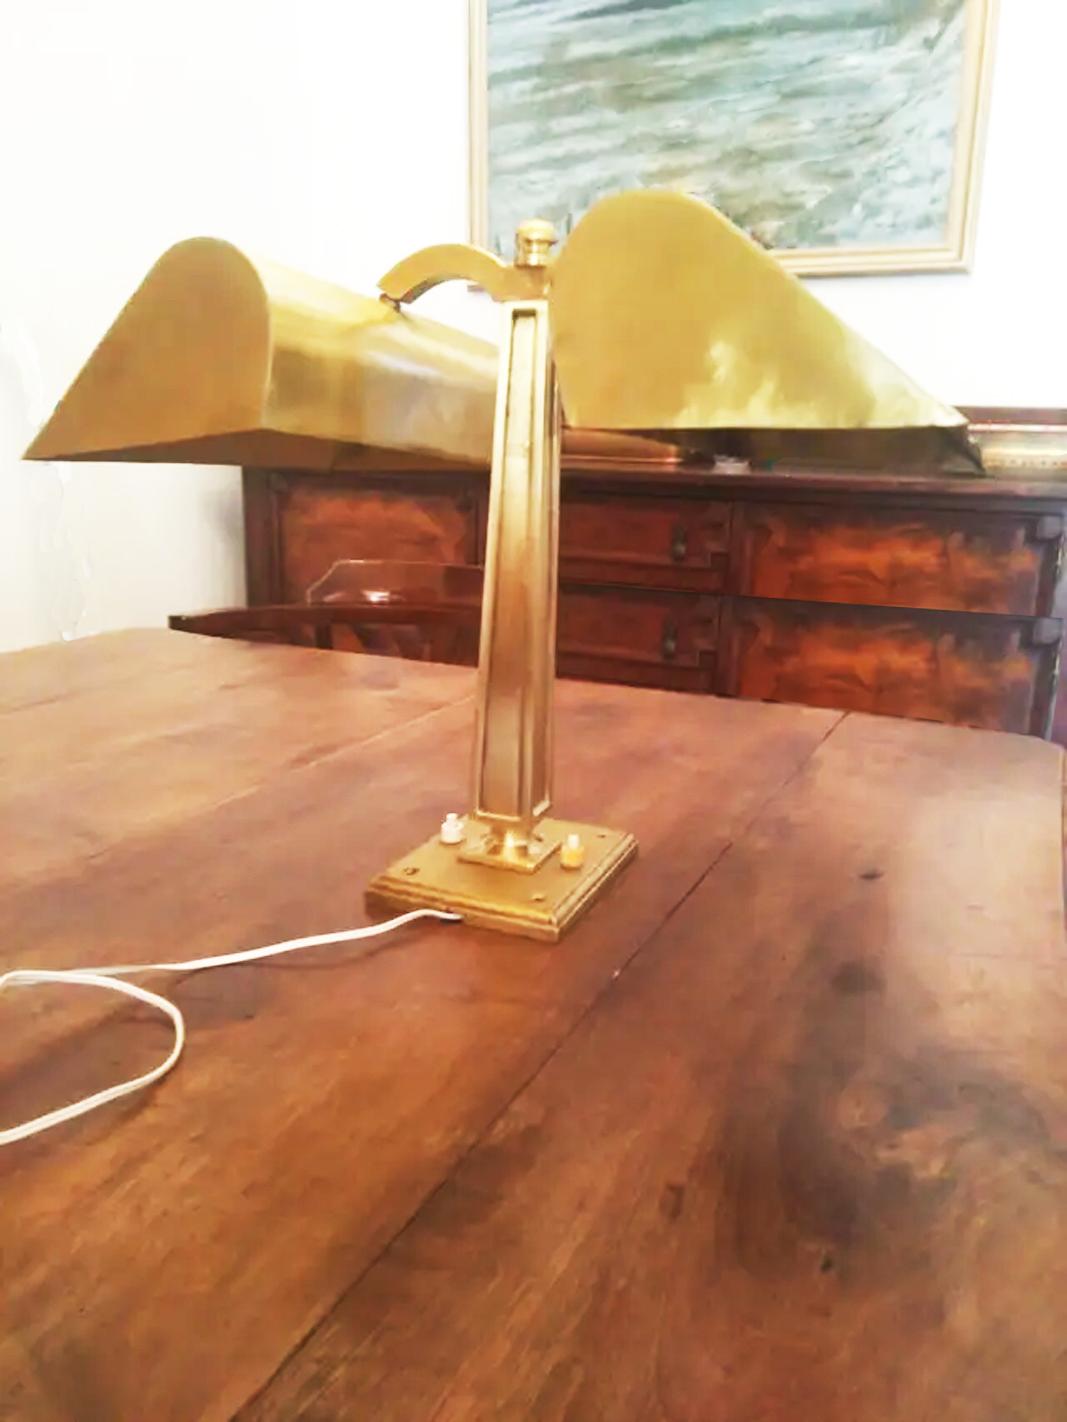 Beautiful brass table double brass banker desk or library lamp, early /mid 20th century, (Between 40s and 50s)
Lamps for office, reading or for bedside tables

This is very elegant and difficult to find double.